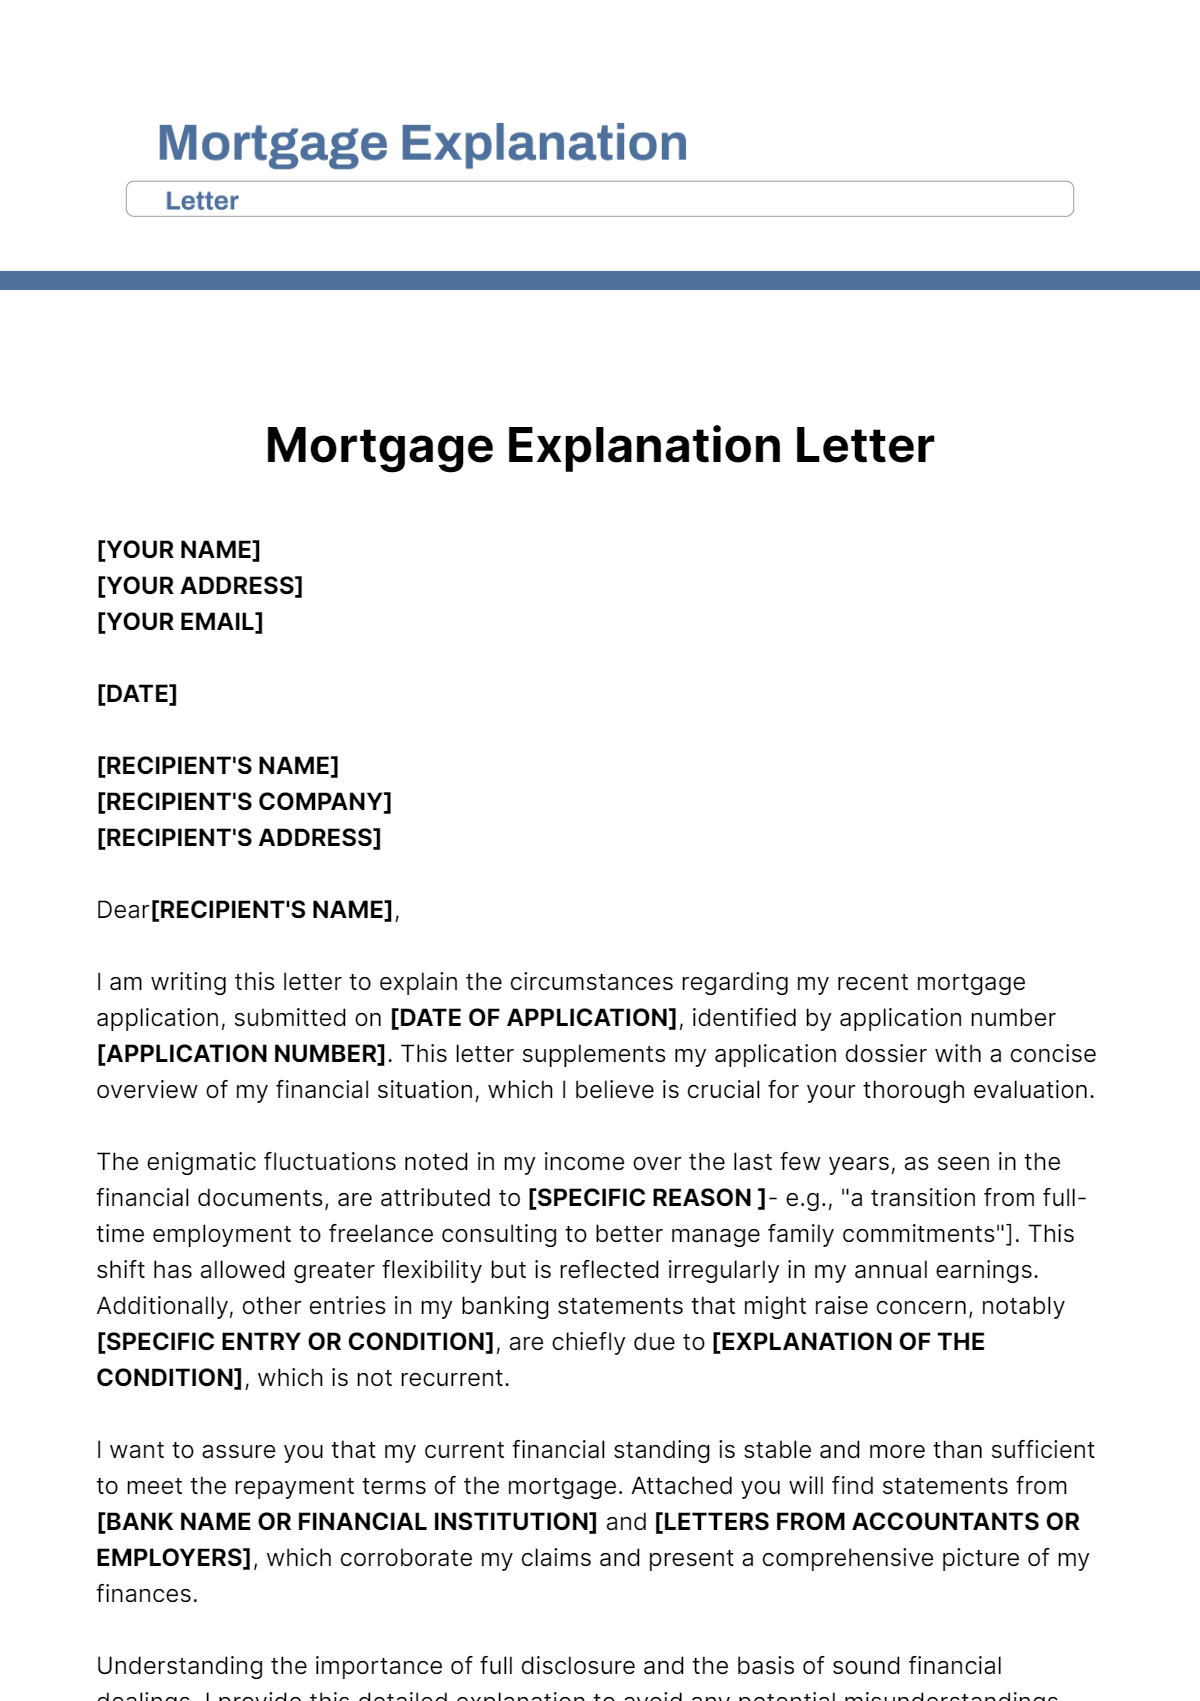 Mortgage Explanation Letter Template